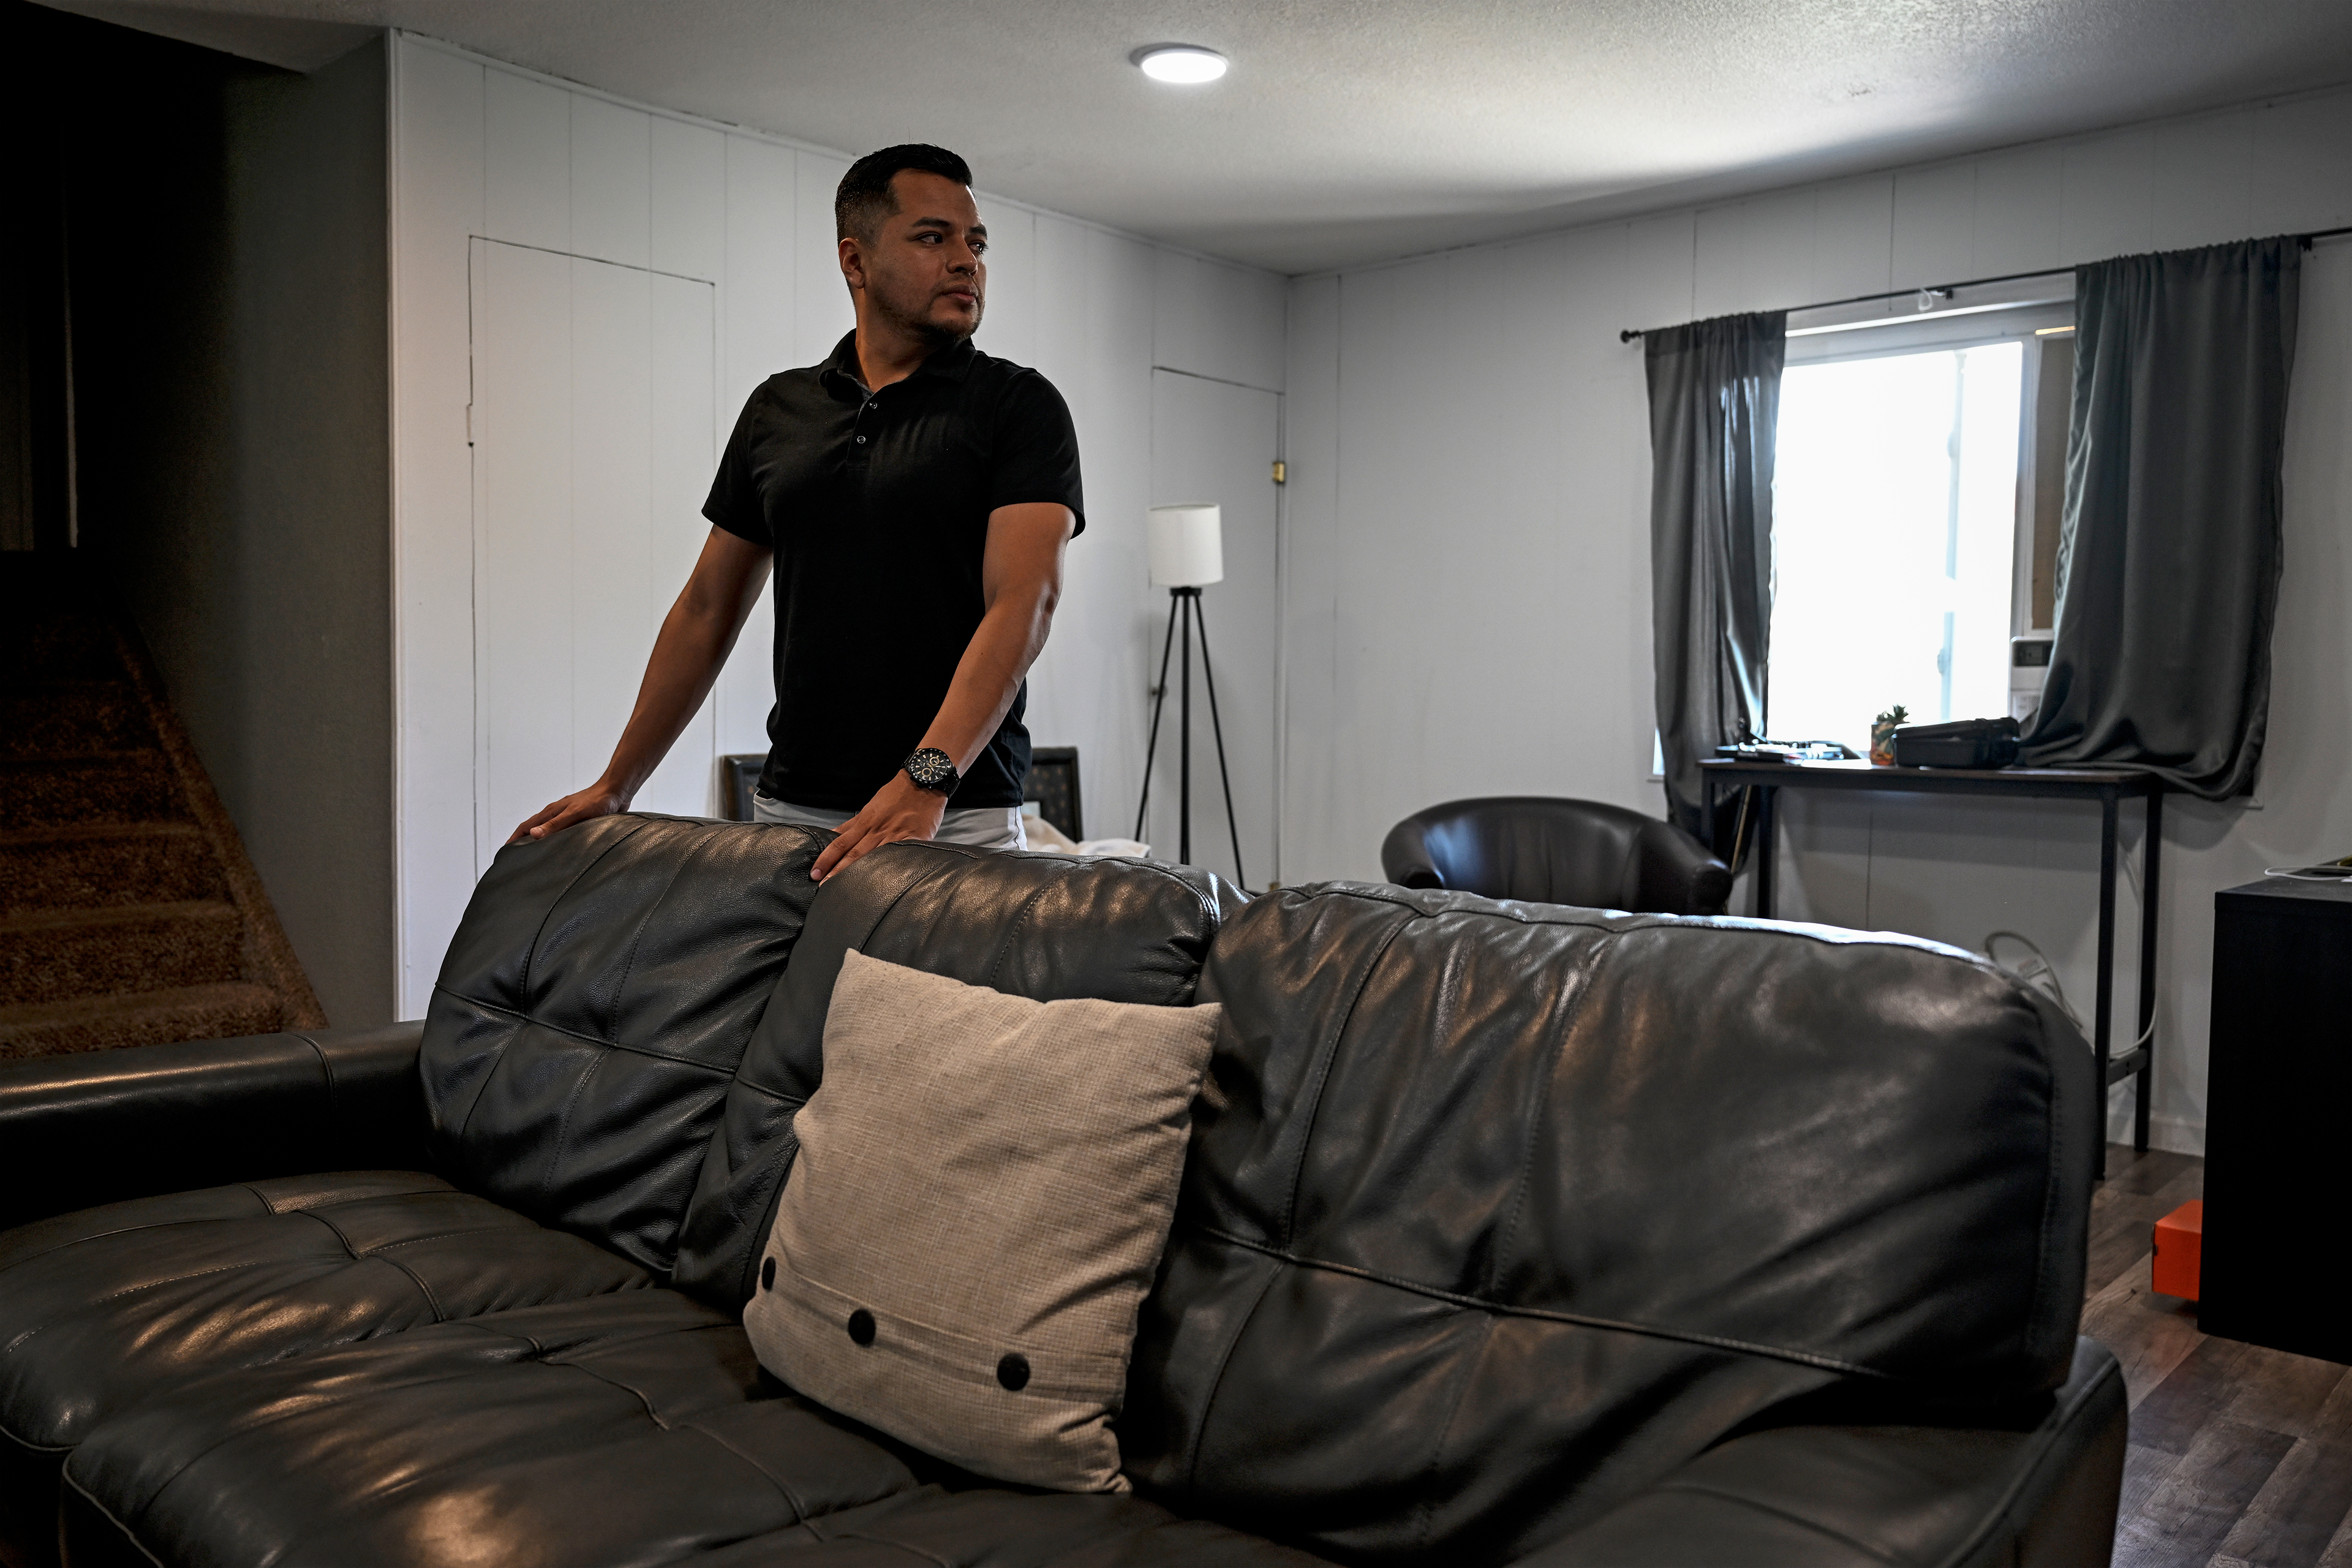 A photo shows Armando Peniche Rosales standing by a couch at home.